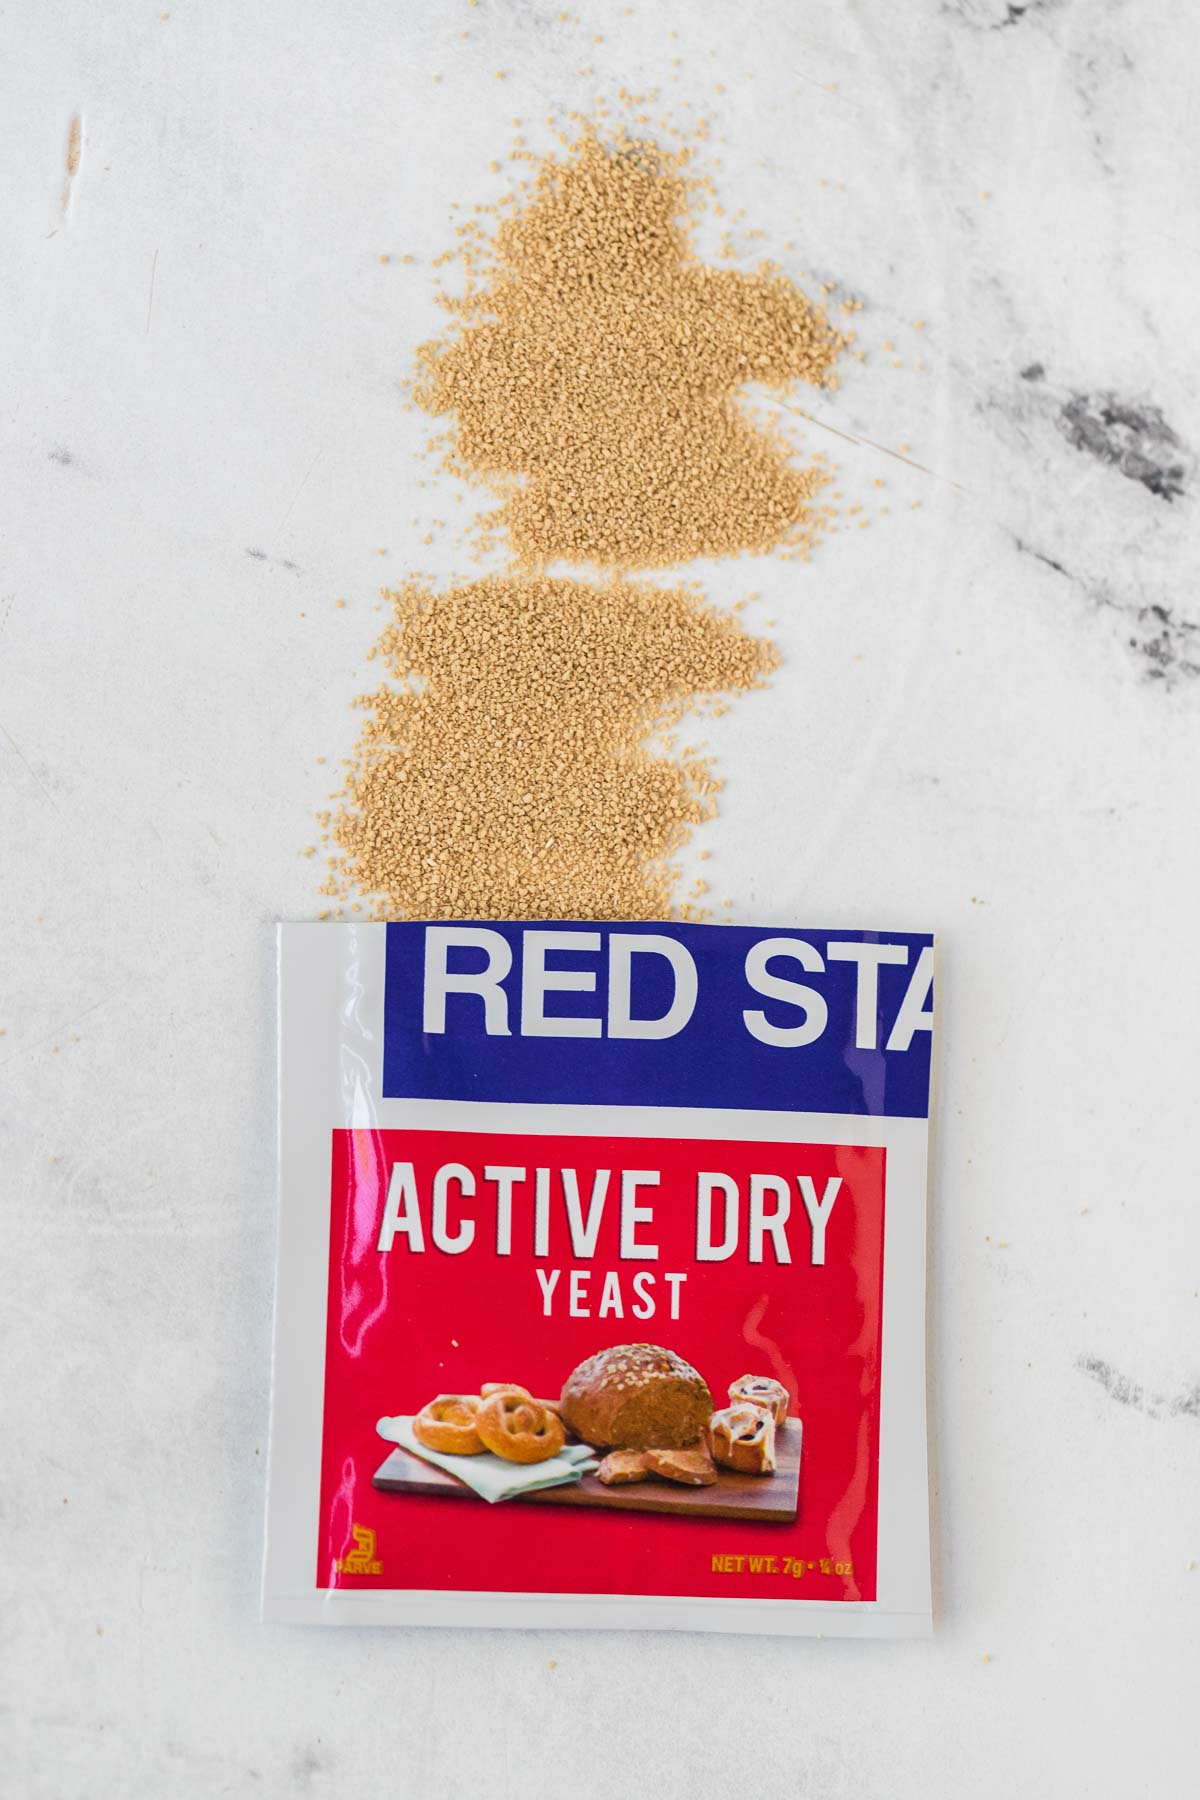 package of active dry yeast opened with yeast spilled out